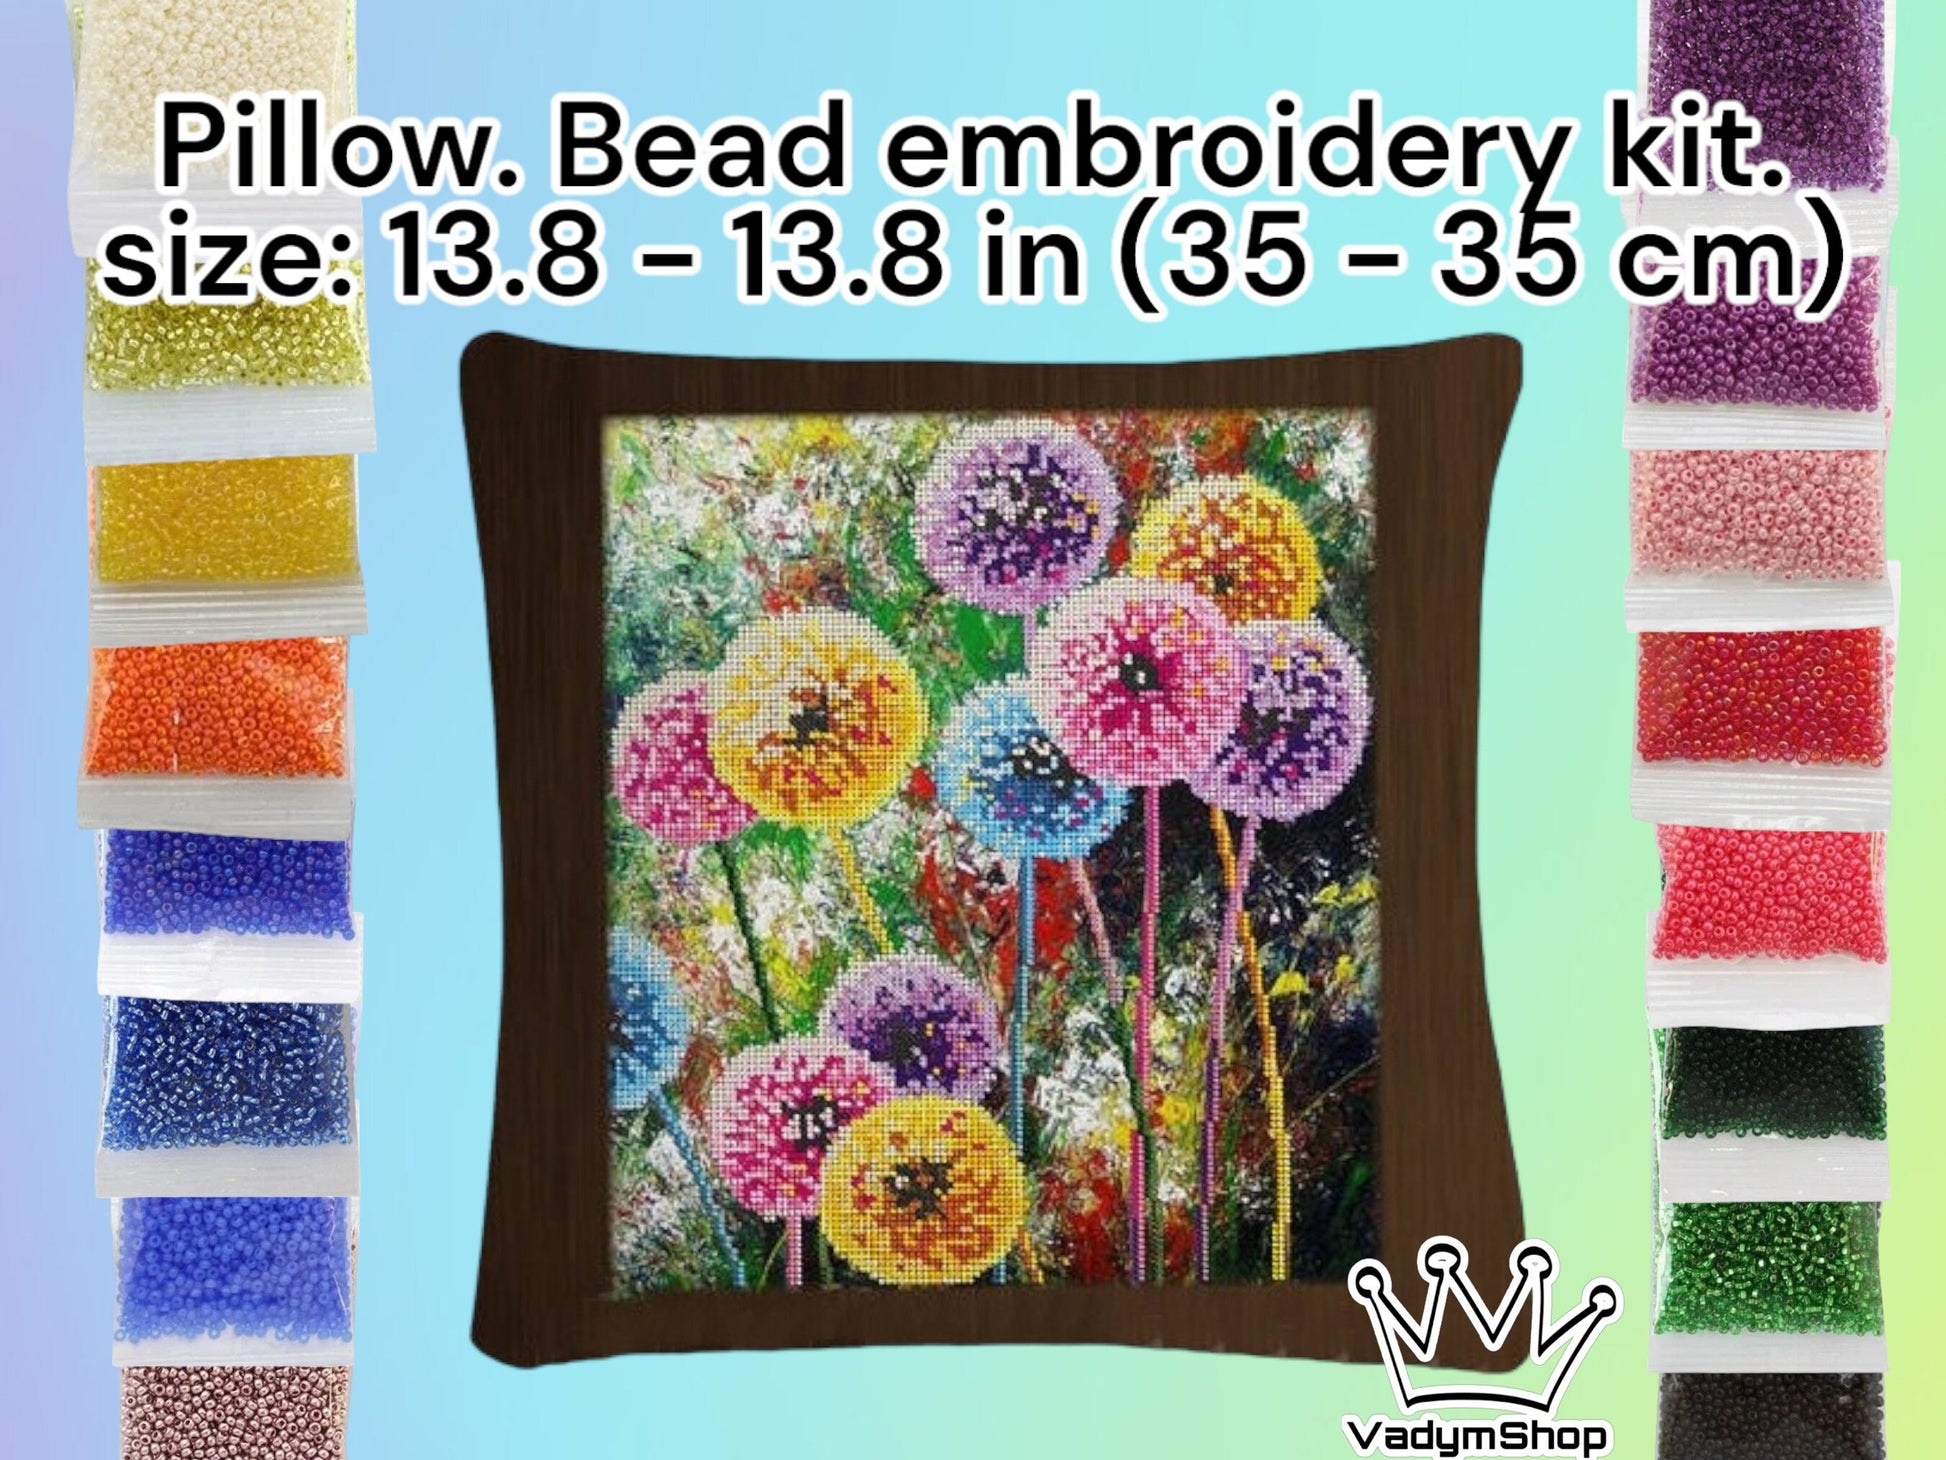 Pillow. Bead embroidery kit.